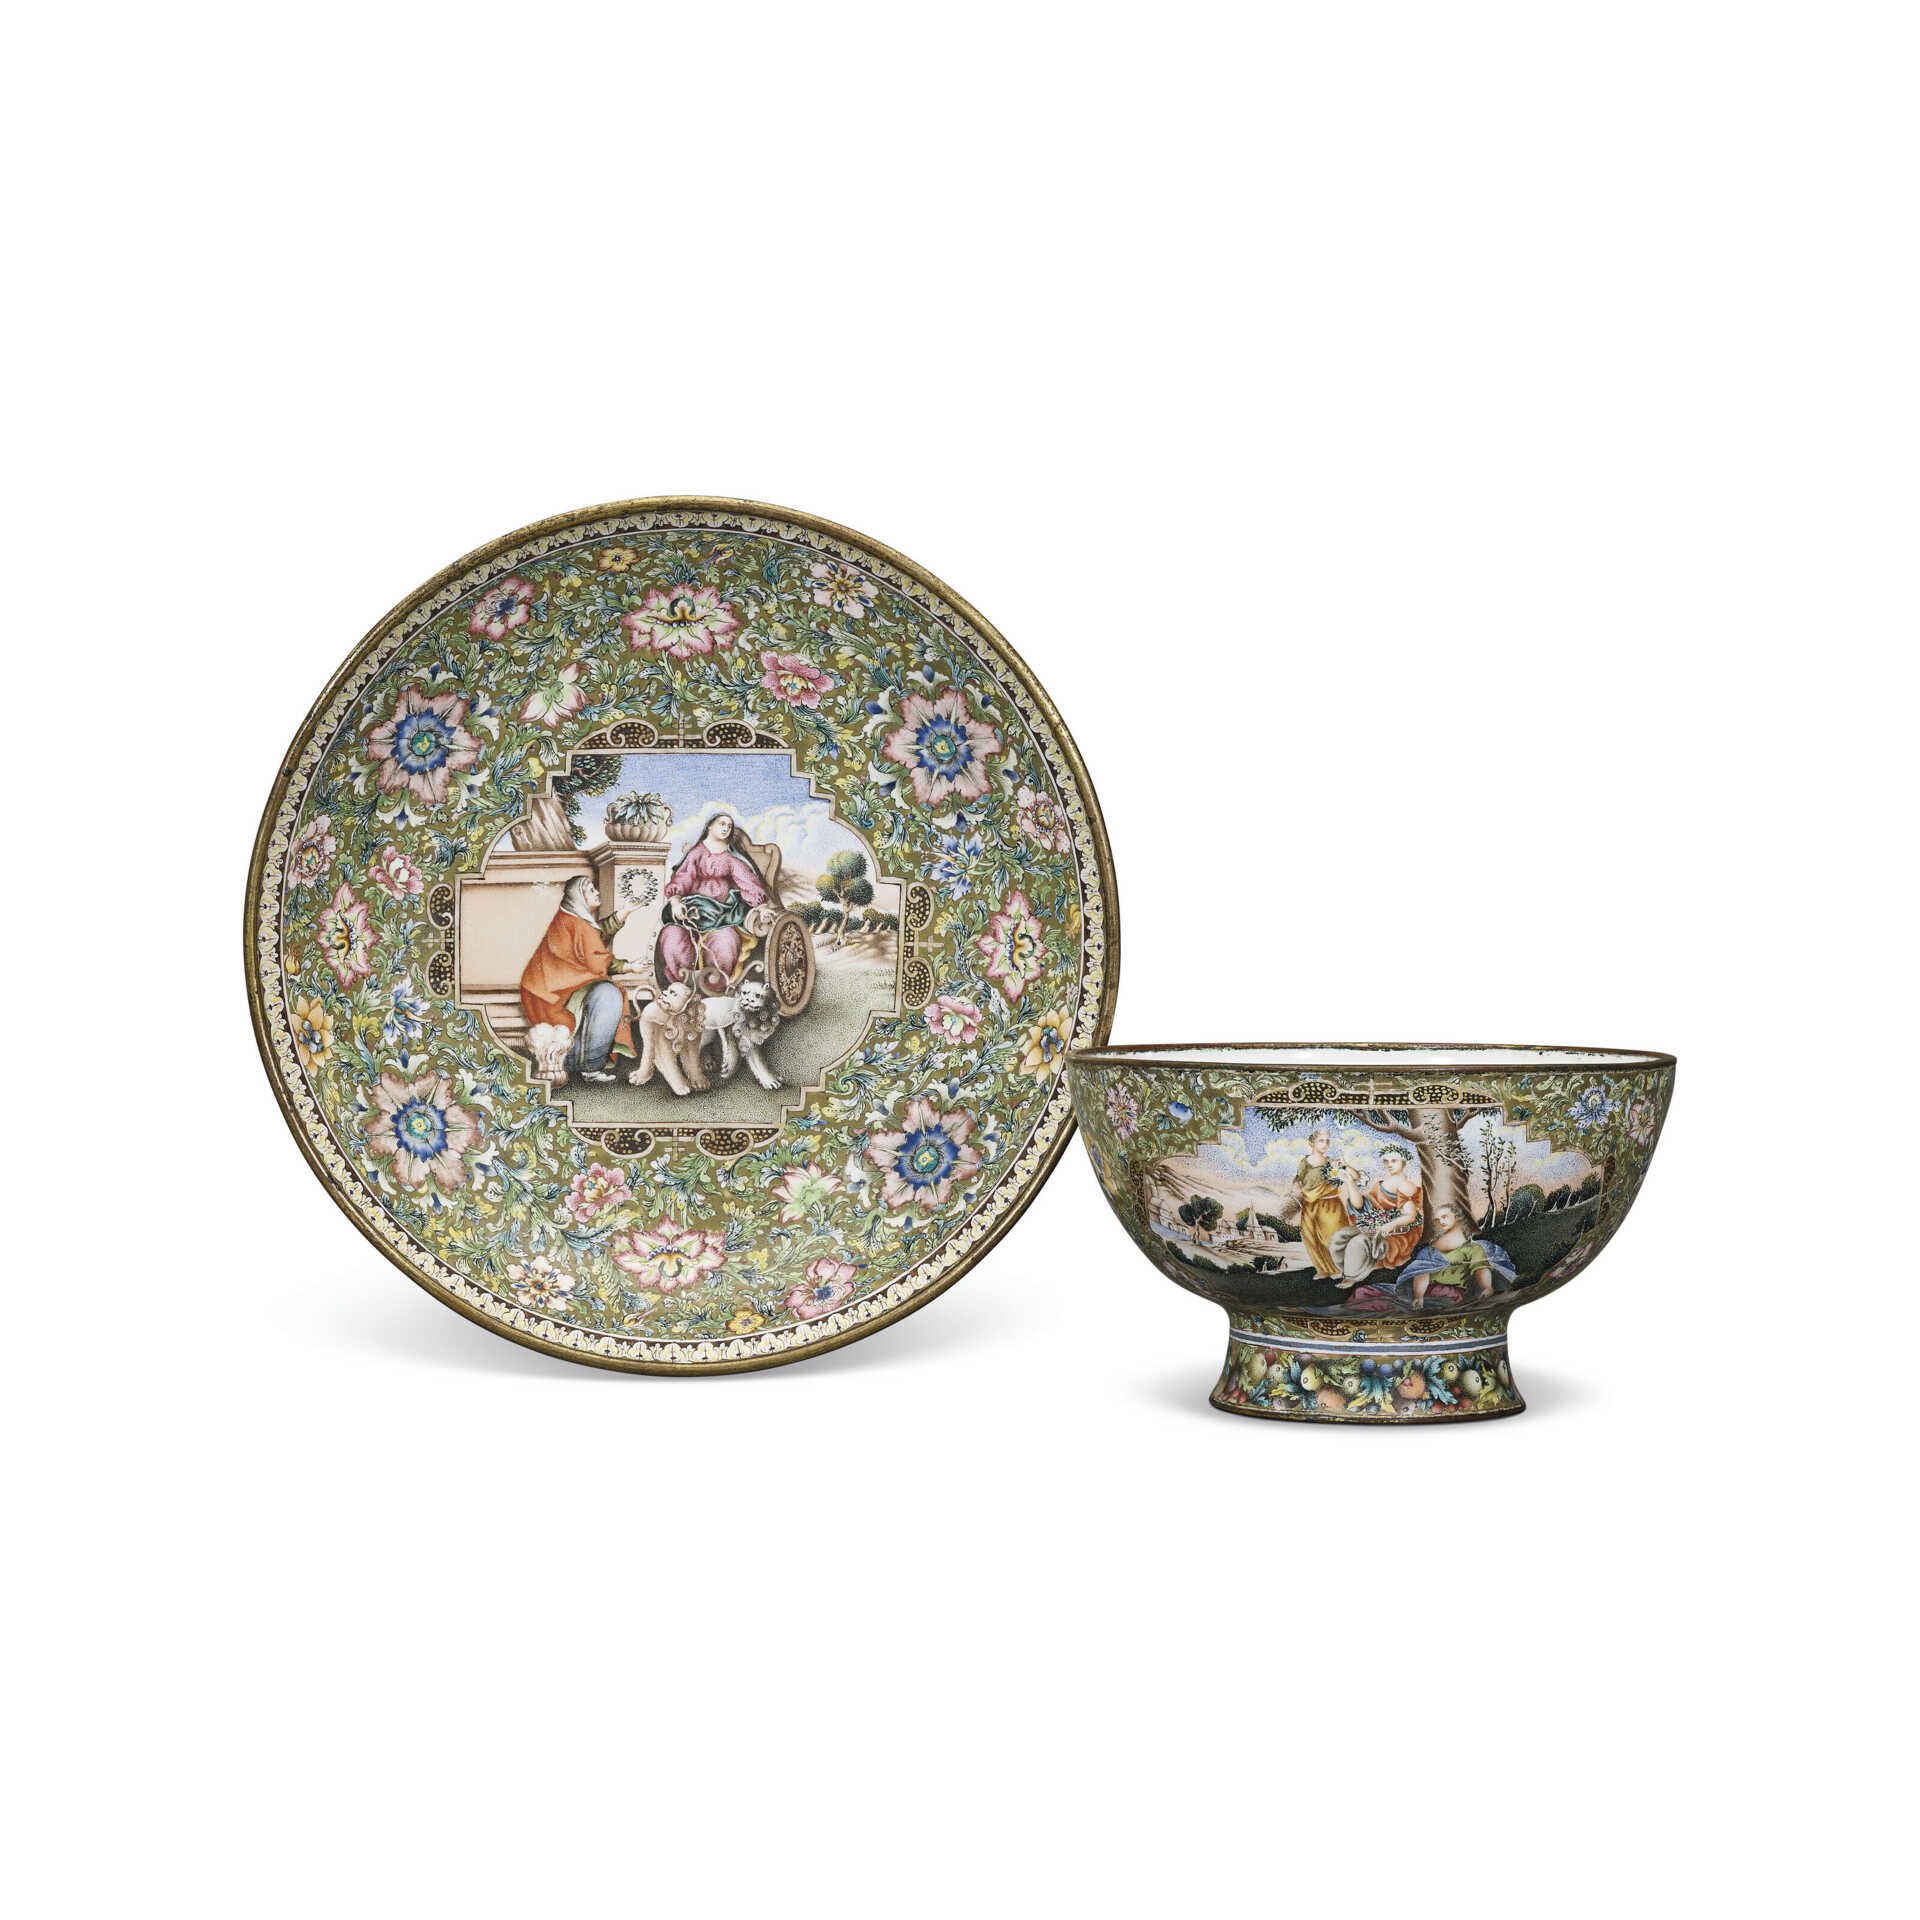 A RARE PAINTED ENAMEL CUP AND SAUCER